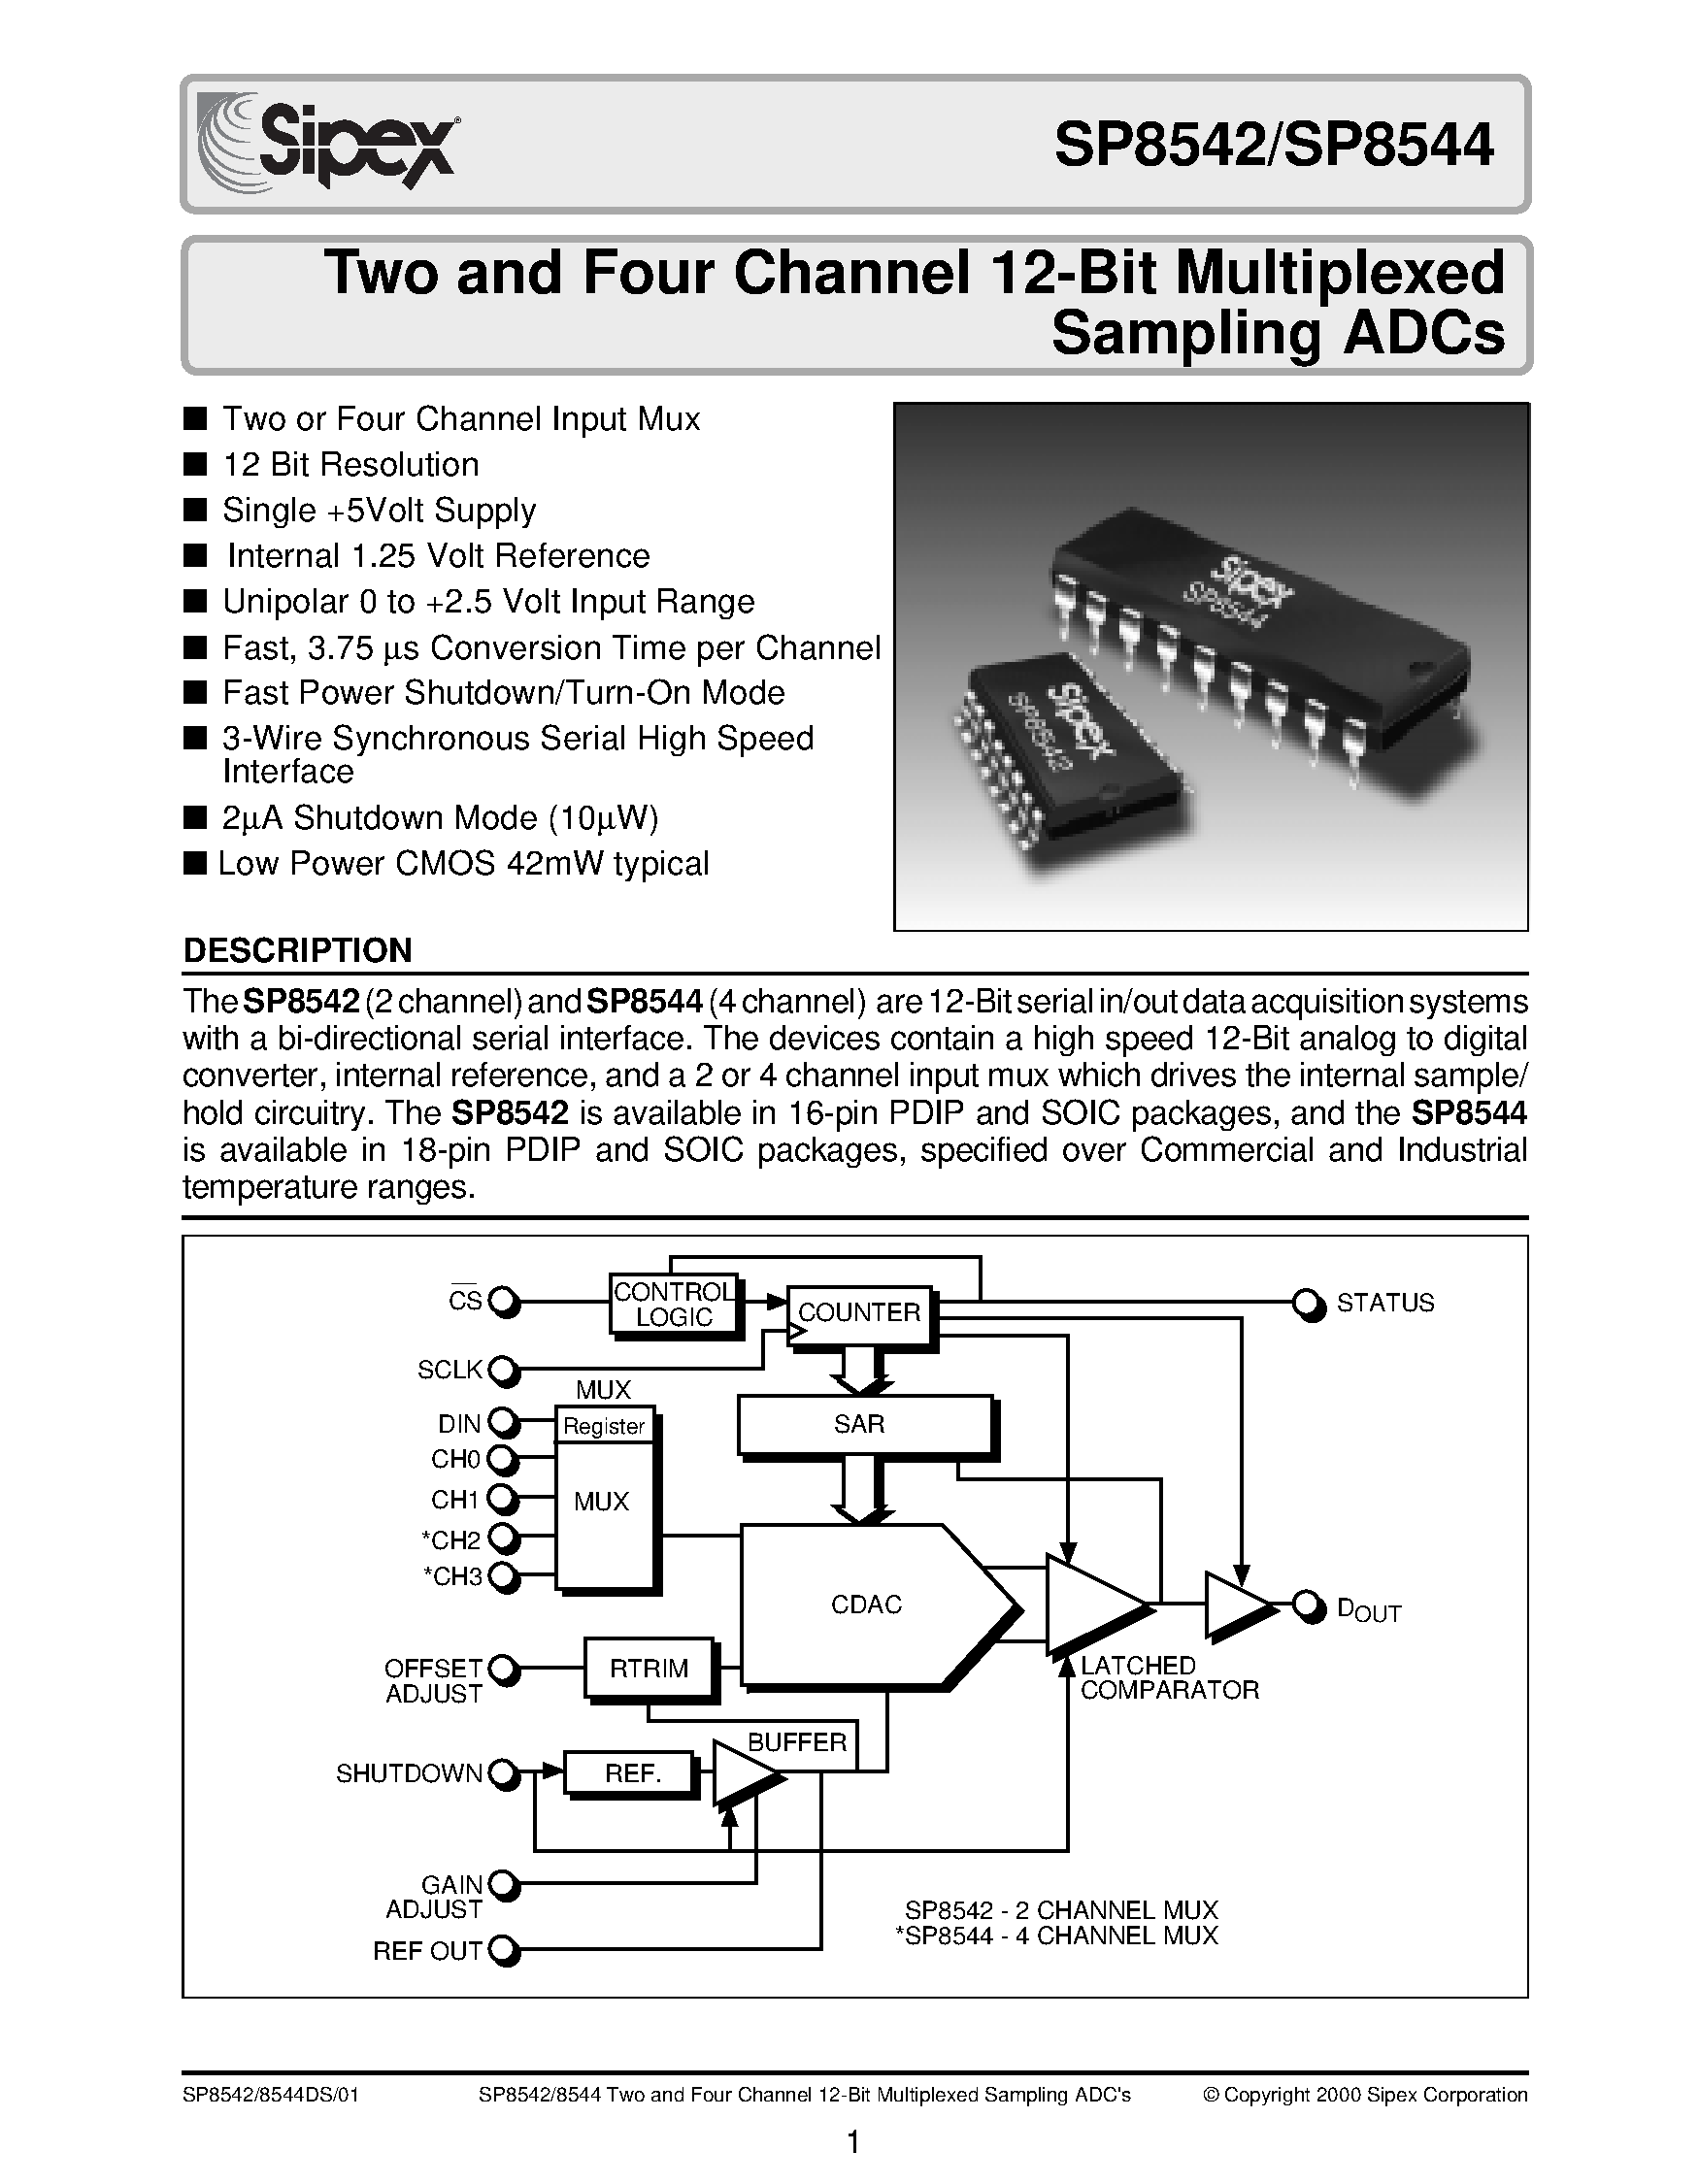 Datasheet SP8544AS - Two and Four Channel 12-Bit Multiplexed Sampling ADCs page 1